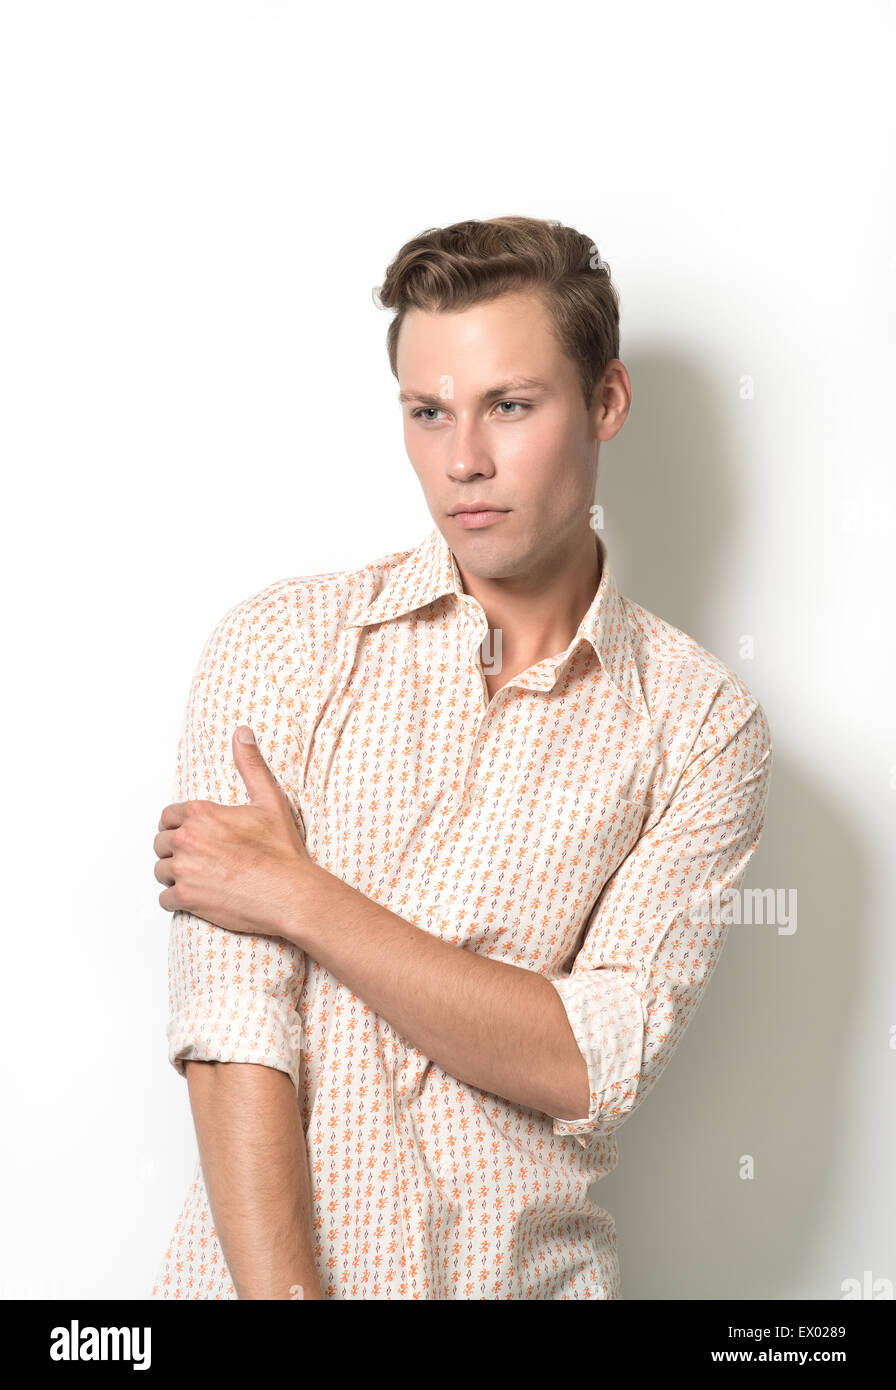 A handsome man, male model posing crossing his arm Stock Photo